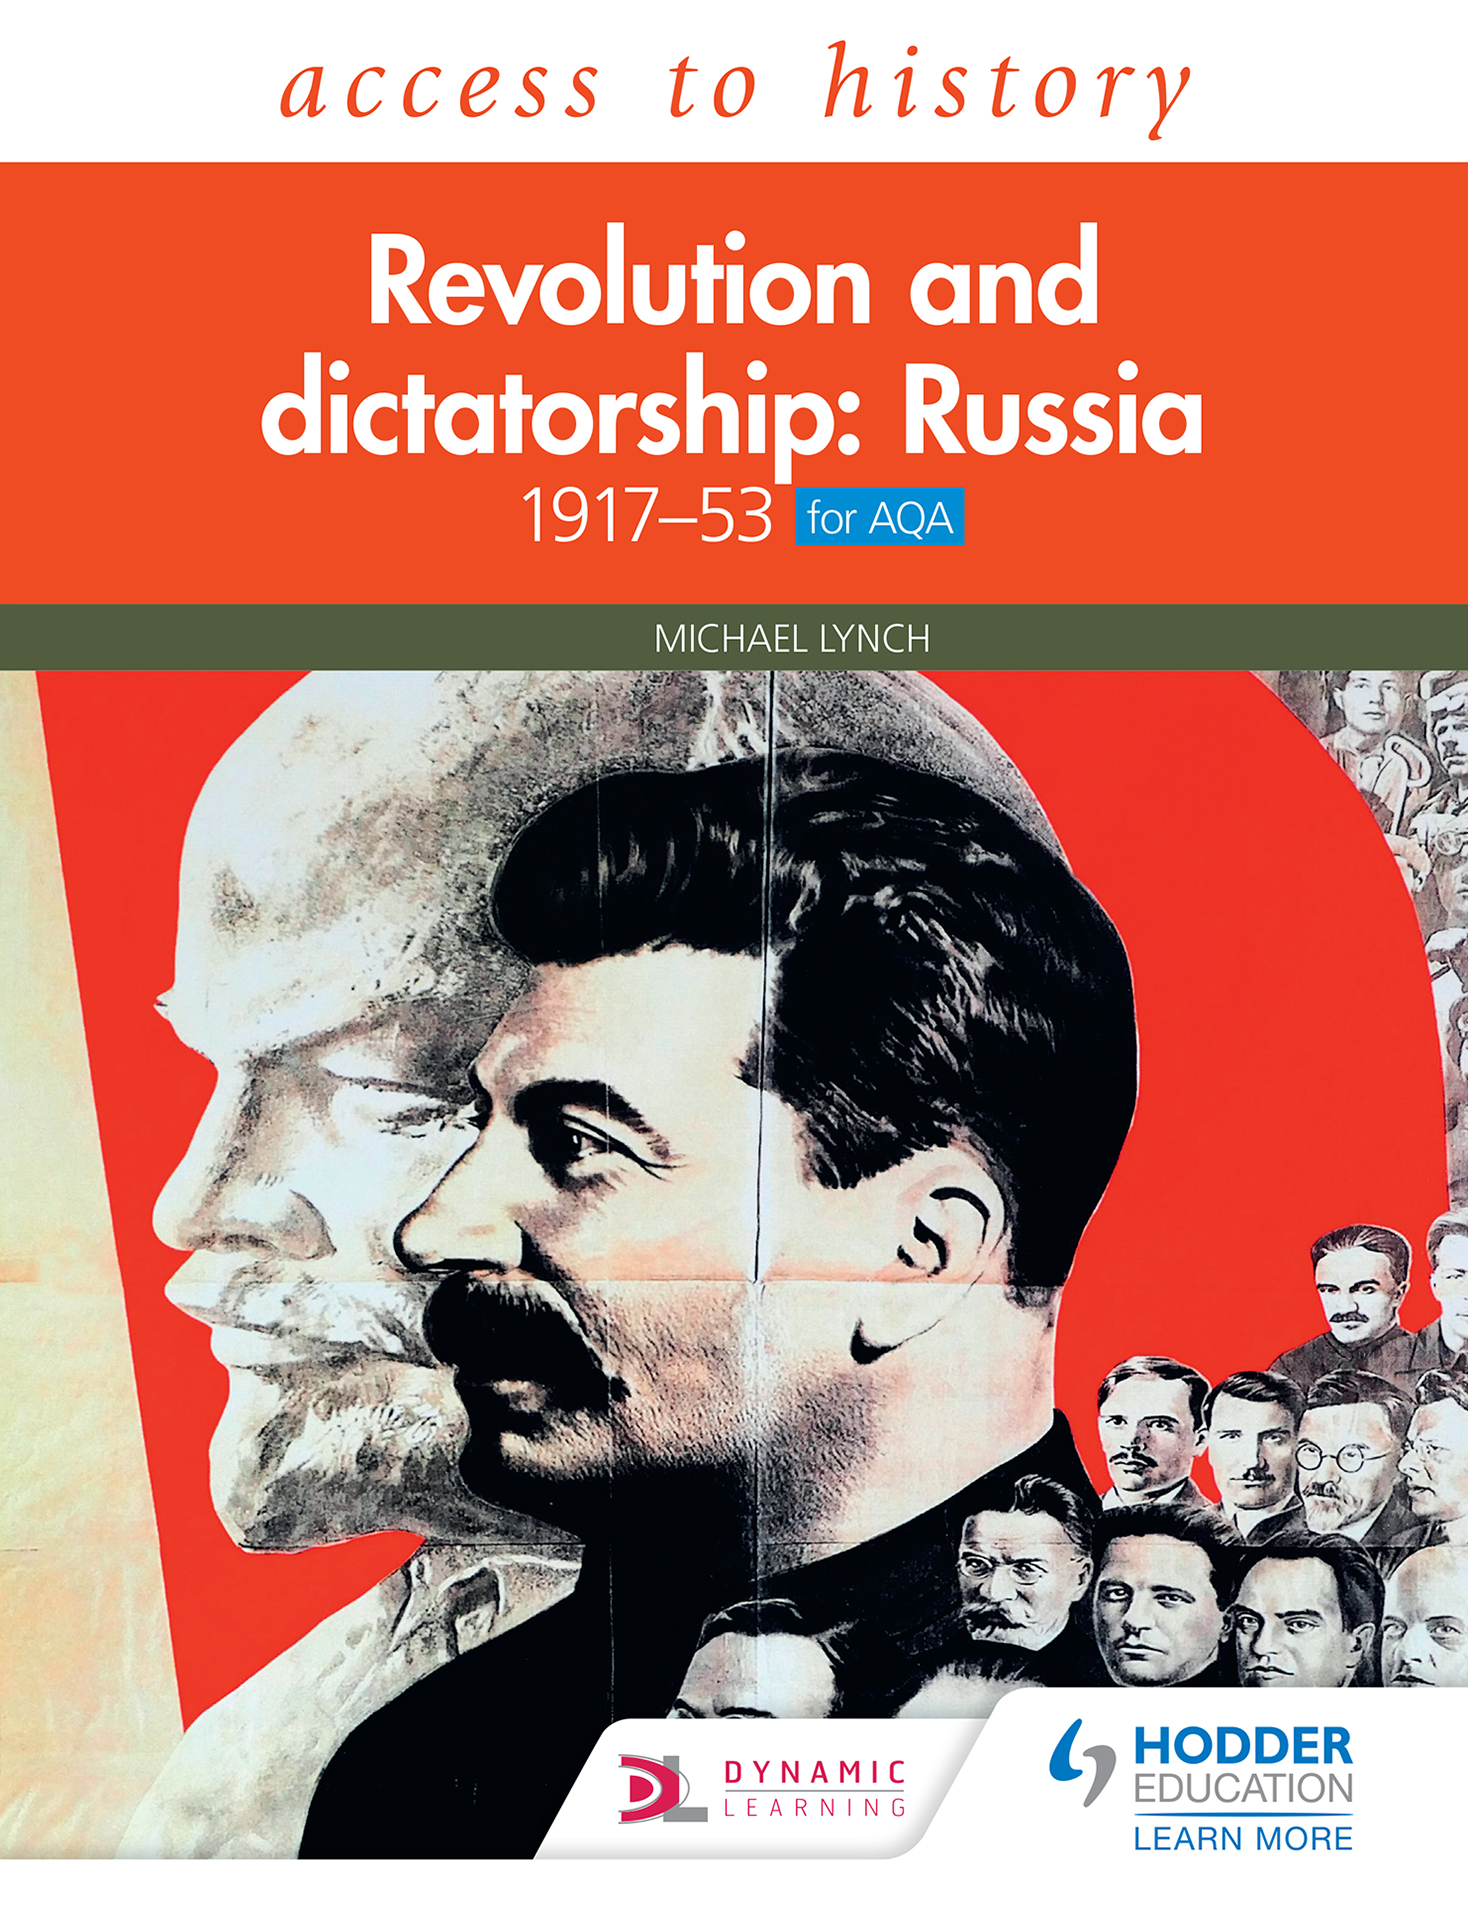 Access to History: Revolution and dictatorship: Russia, 1917–1953